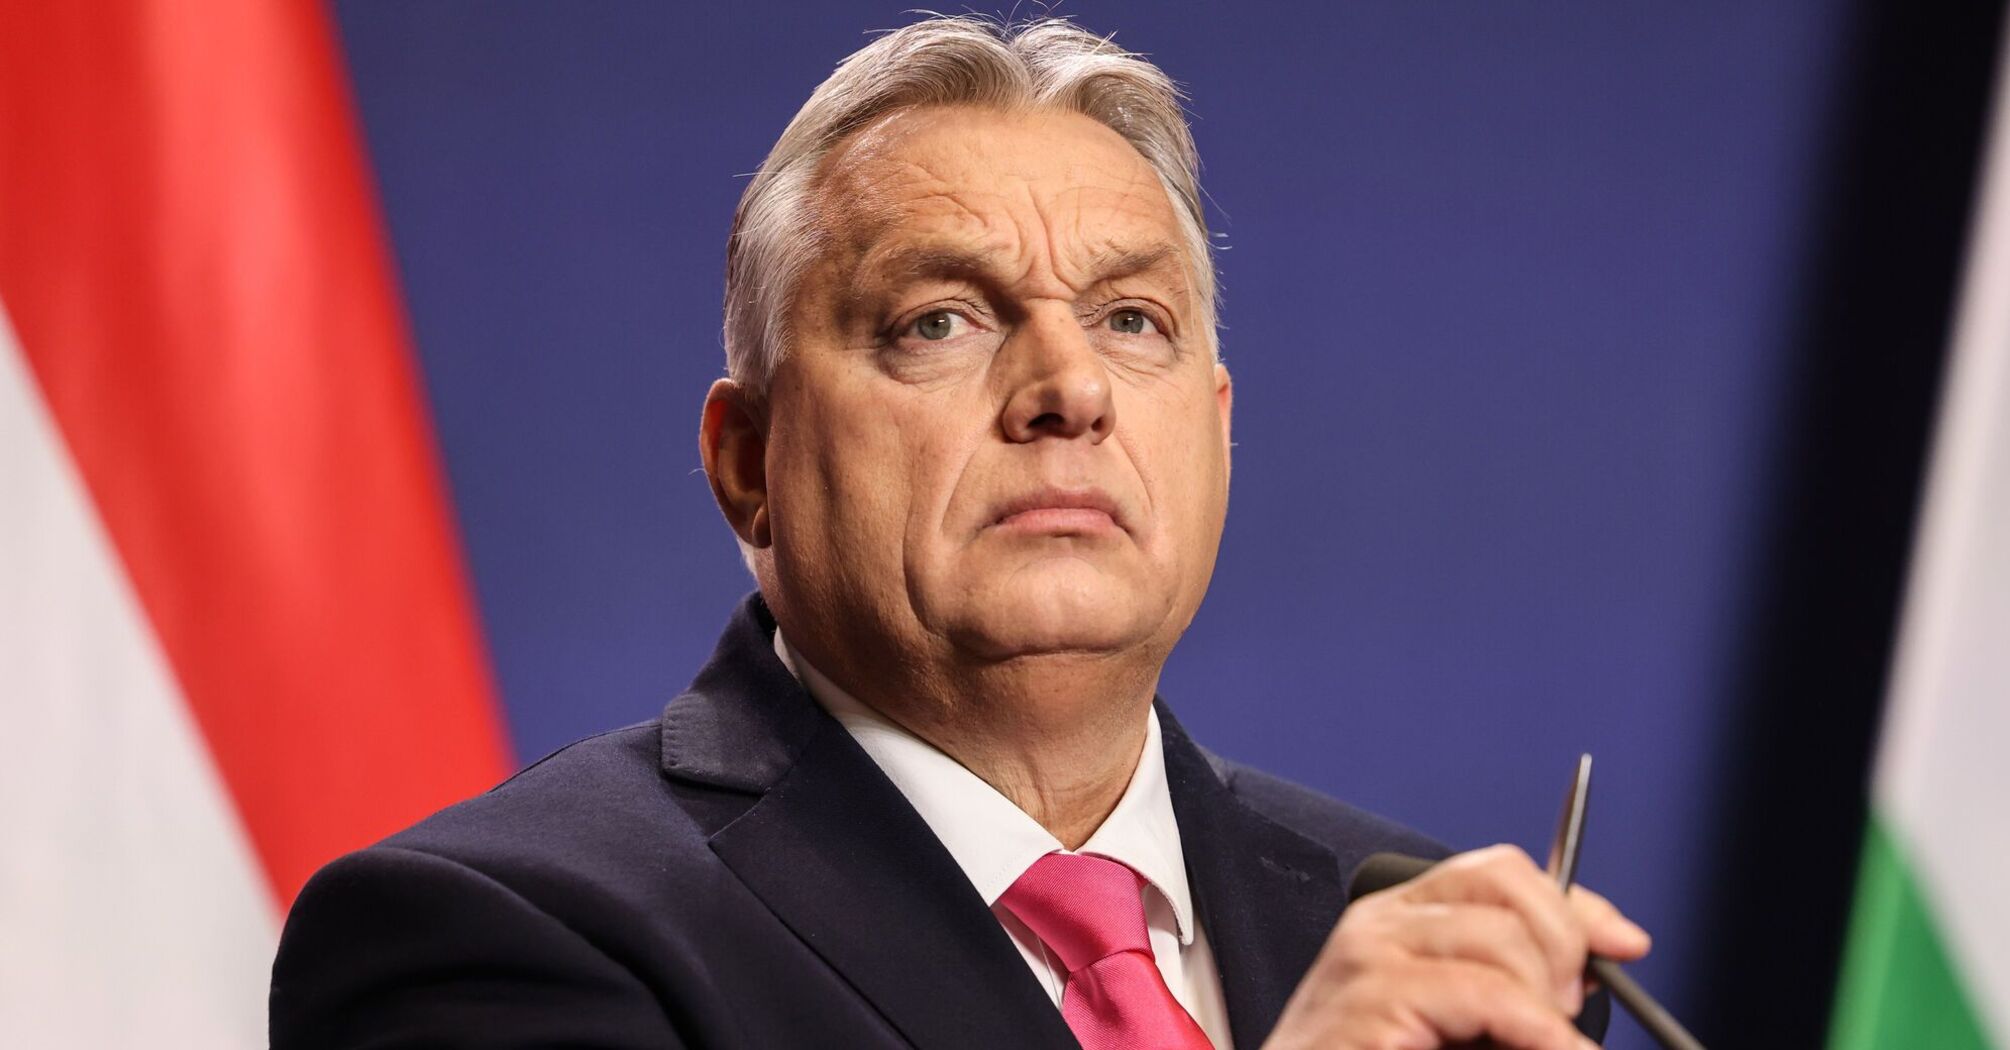 Worst result in 20 years: Orban's party fails in European Parliament elections